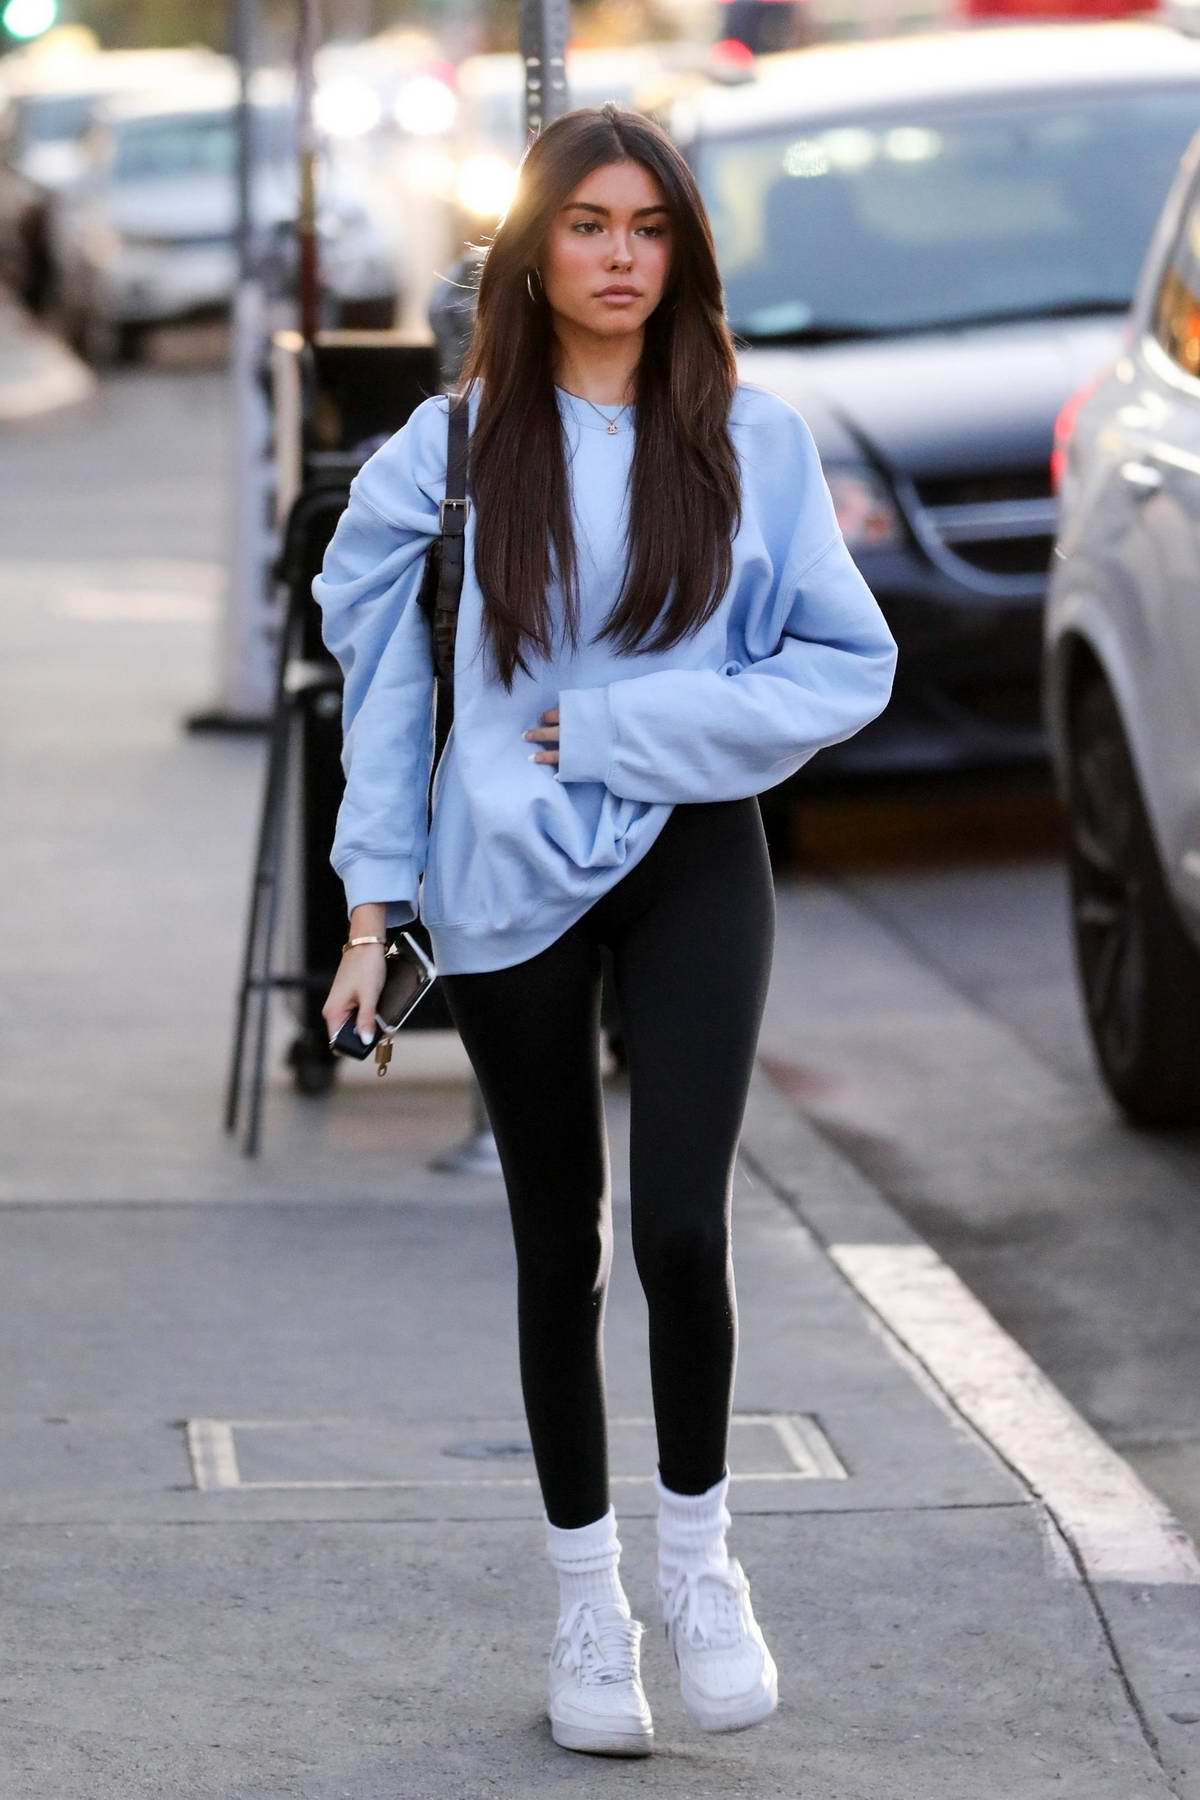 https://www.celebsfirst.com/wp-content/uploads/2019/12/madison-beer-sports-a-light-blue-sweatshirt-and-black-leggings-while-visiting-a-salon-in-west-hollywood-los-angeles-181219_8.jpg